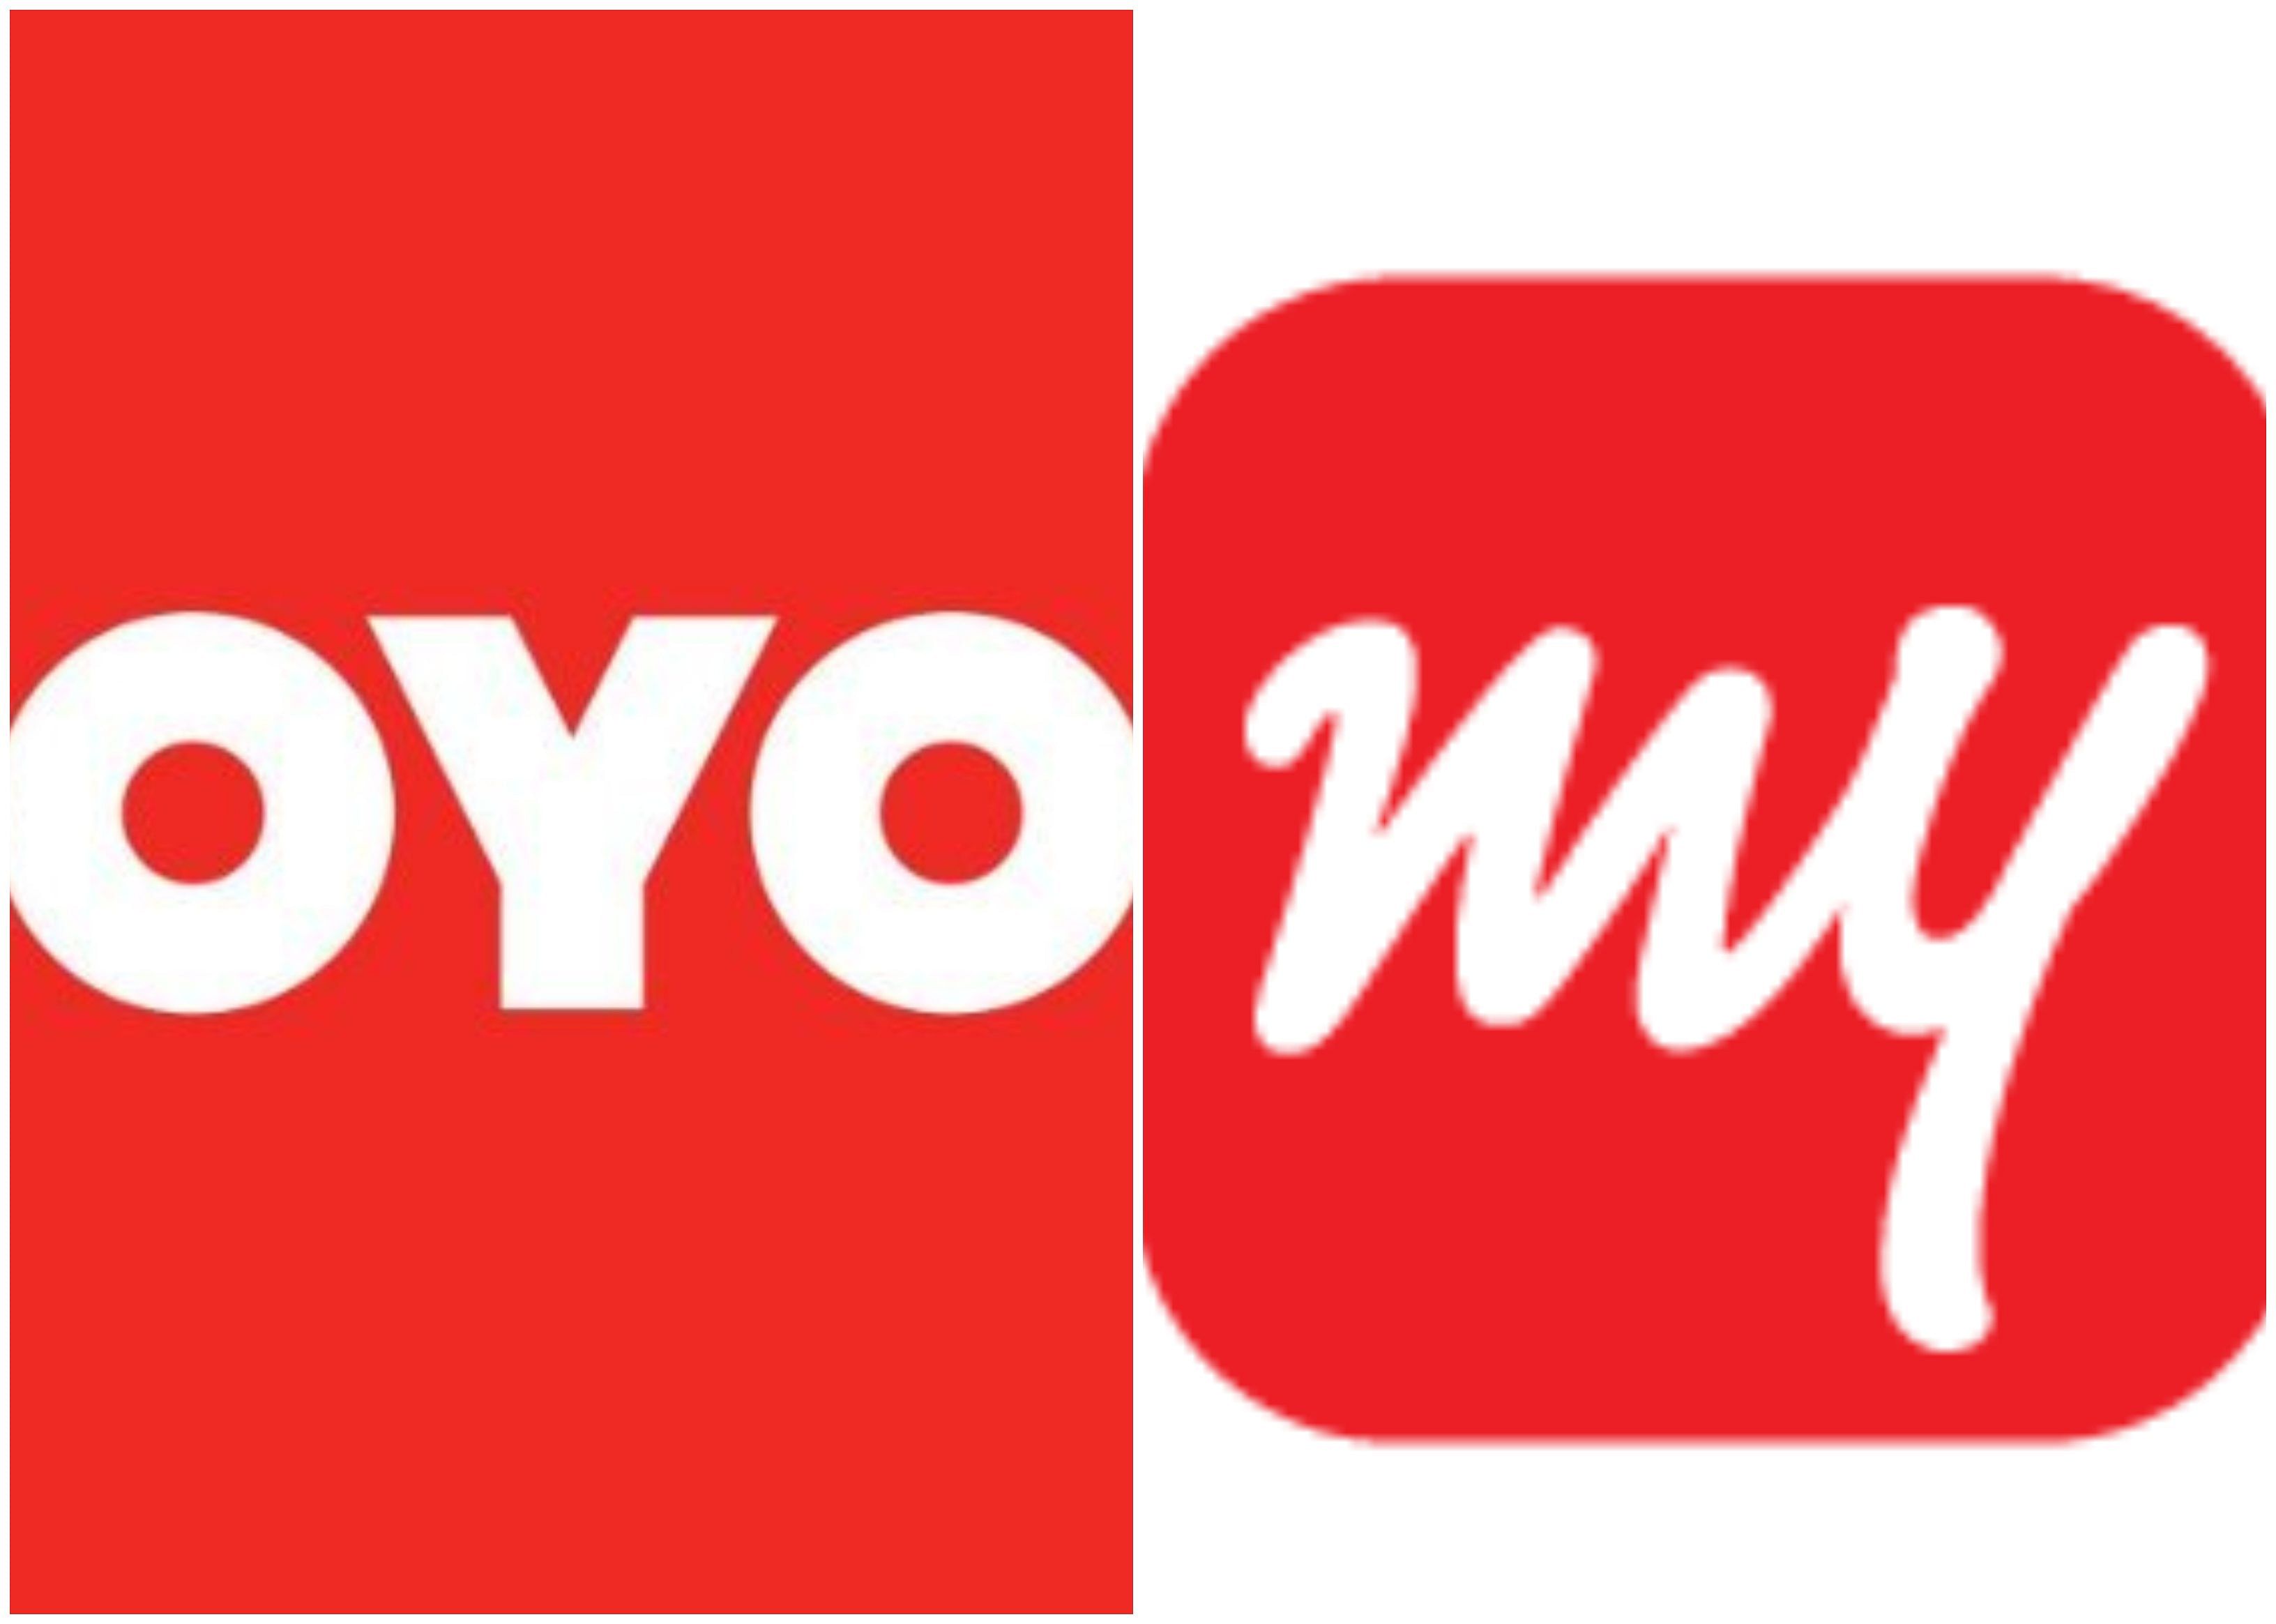 MMT, an online travel agency, has a pact with OYO, which provides franchising services to budget hotels.